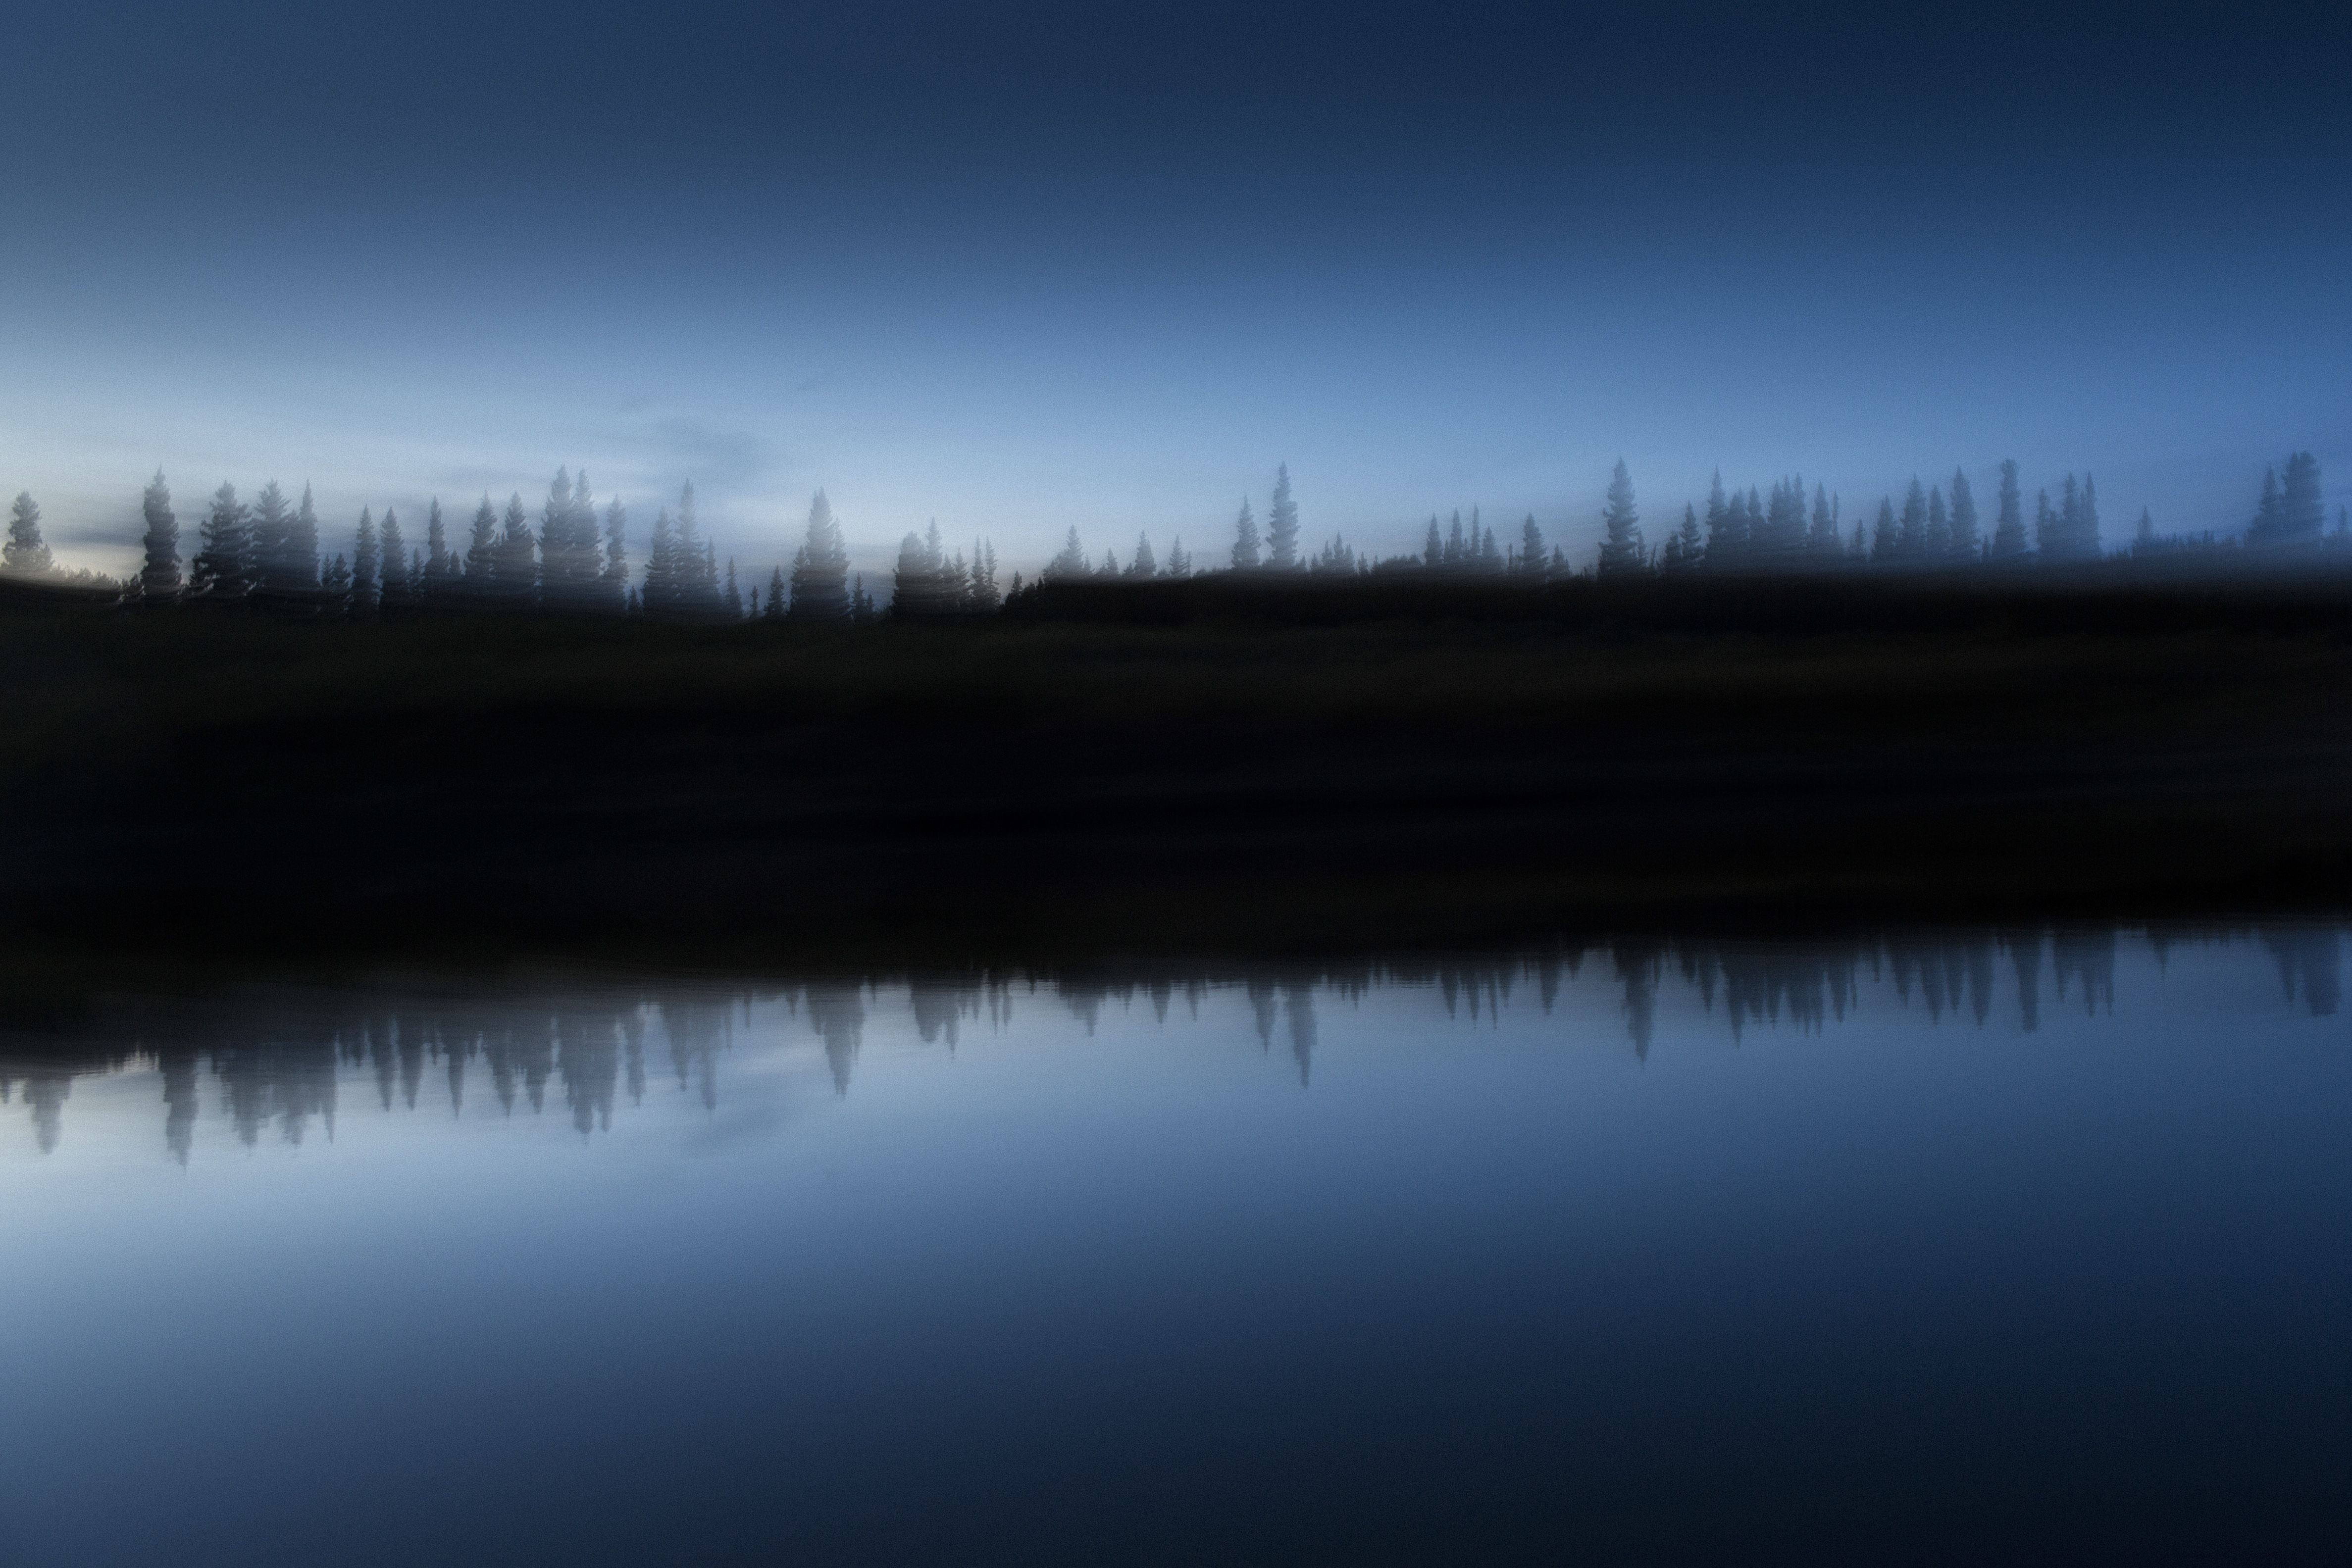 The Attawapiskat river at dusk. The river is a central part of cultural life for the Cree of Attawapiskat, having provided them with food, transportation and recreation for generations. The word Attawapiskat translates to “People of the Parting Rocks,” in reference to a distinct rock formation found several kilometres up river. Image by David Maurice Smith. Canada, 2016.